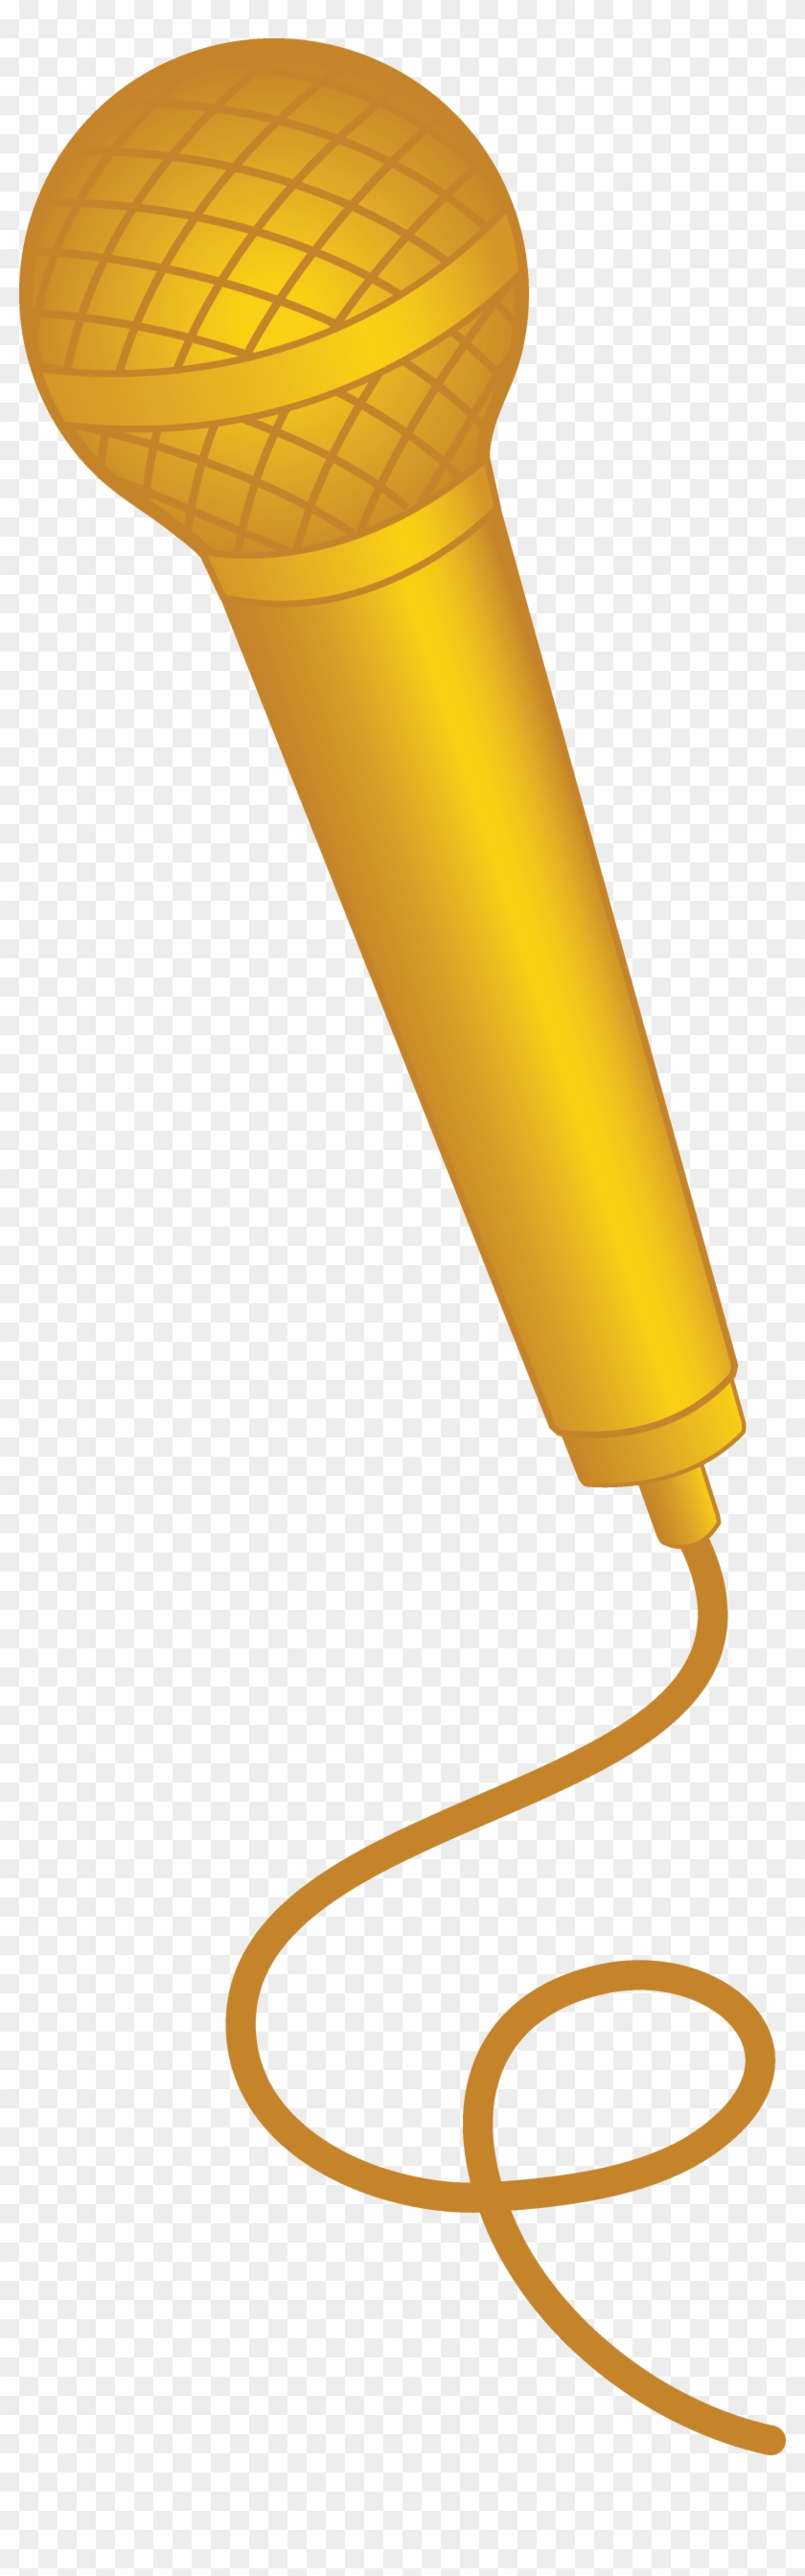 Yellow clipart microphone.